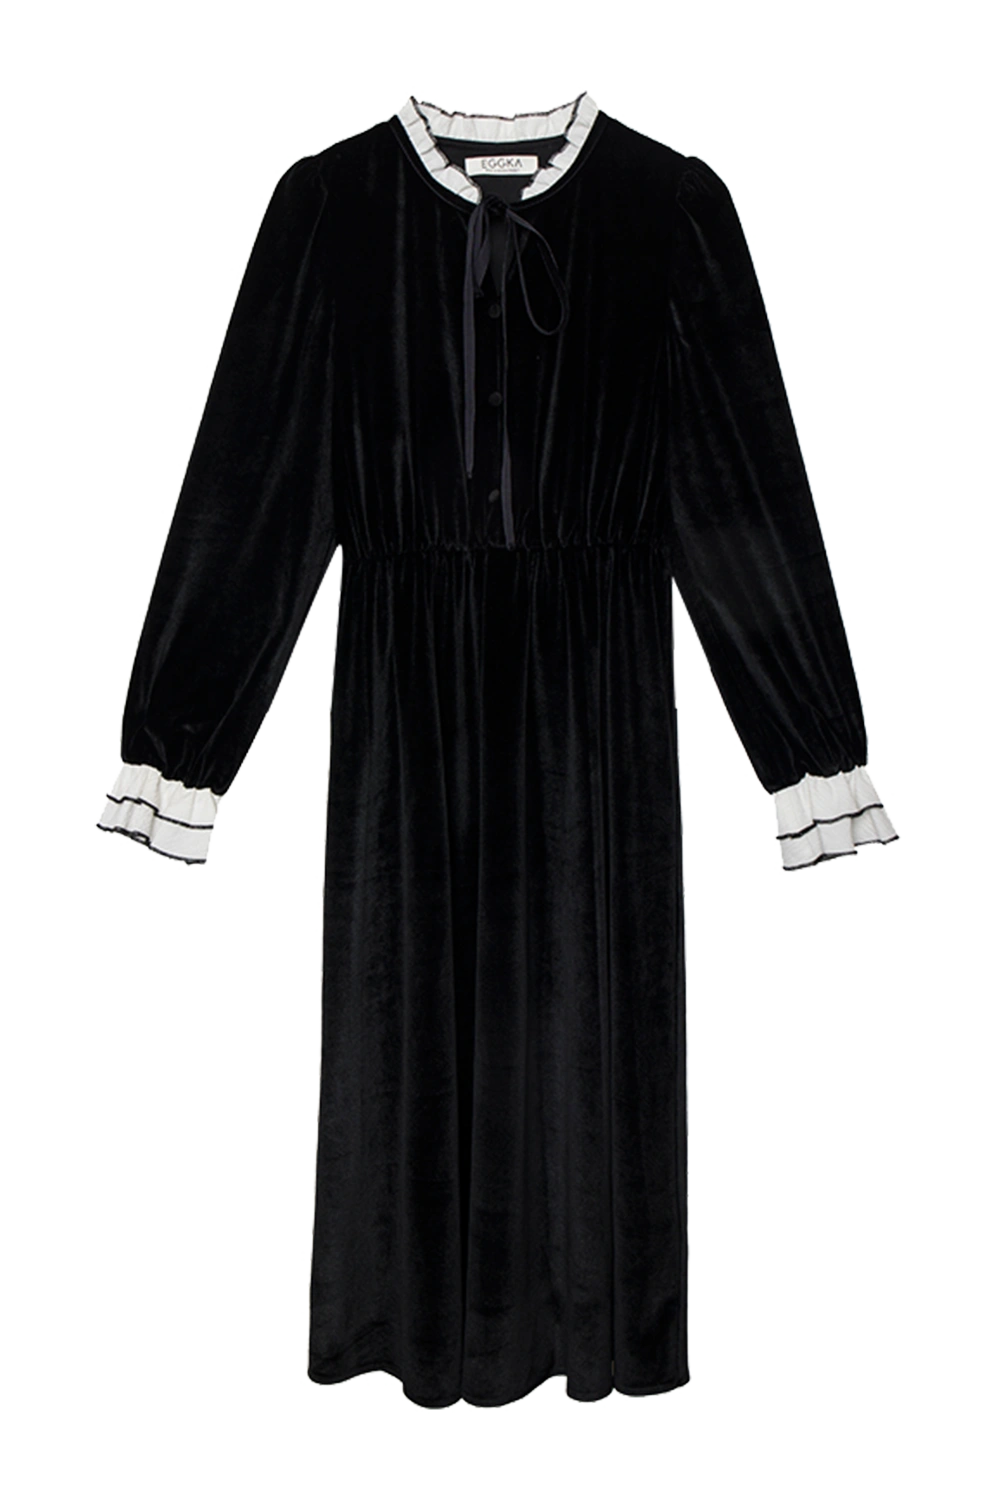 Women's Long Sleeve Velvet Dress with Contrast Ruffle Cuffs and Bow Collar - Black